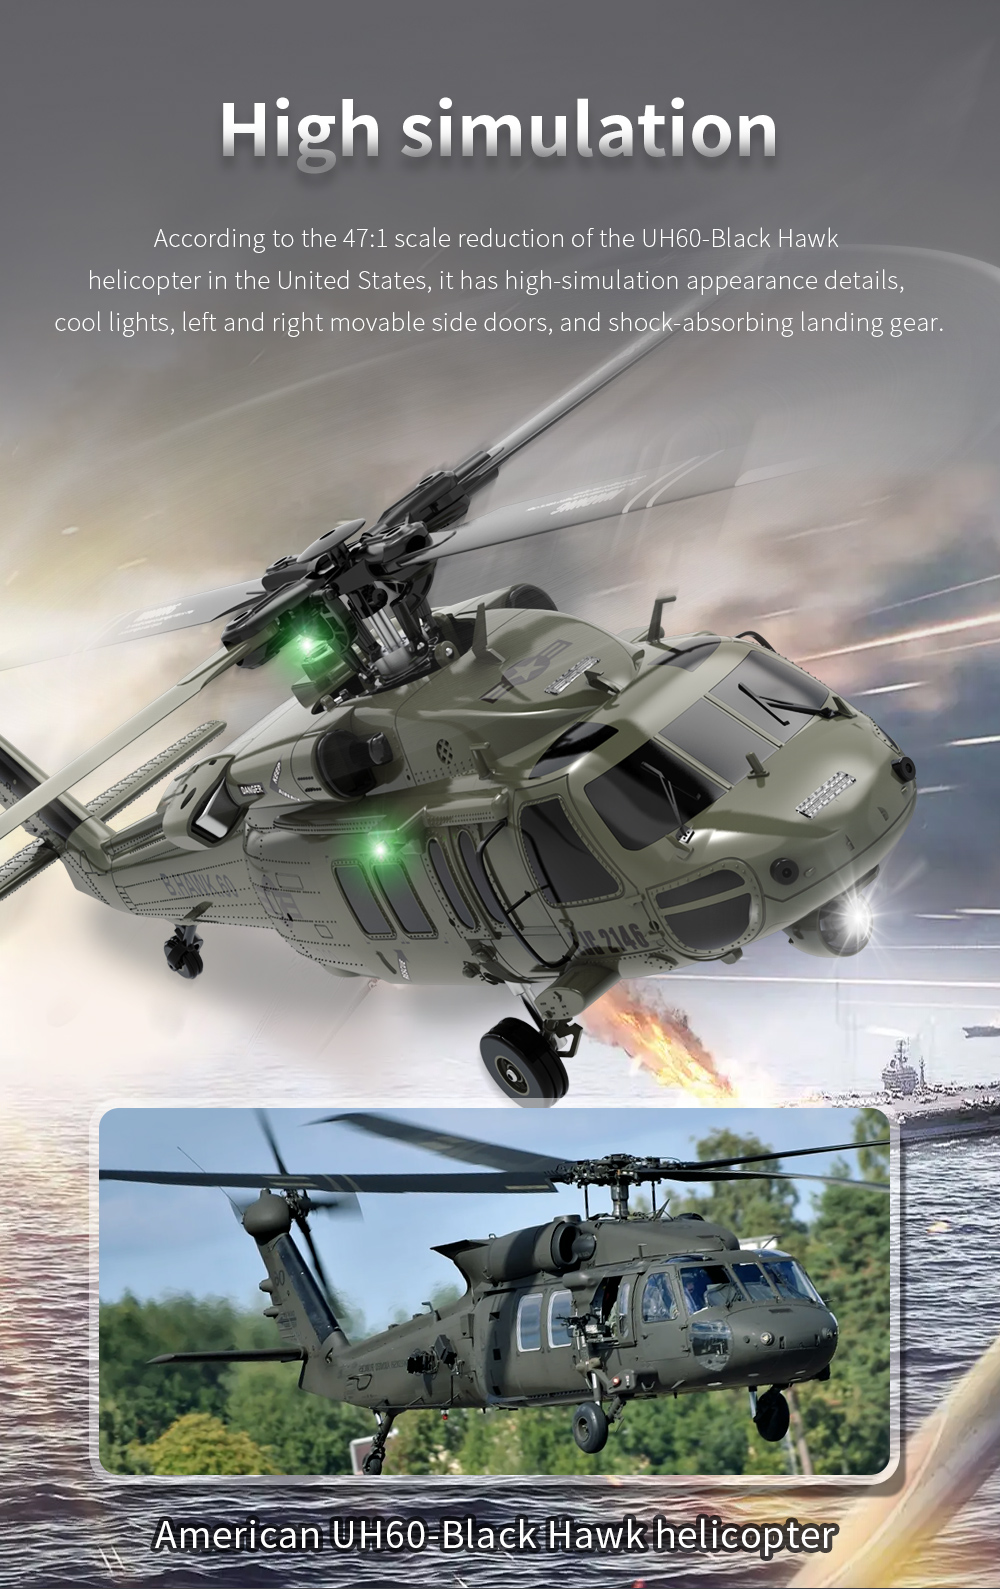 UH-60 Black Hawk RC Military Helicopter (remote control army helicopter, rc army helicopter, remote control military helicopter)